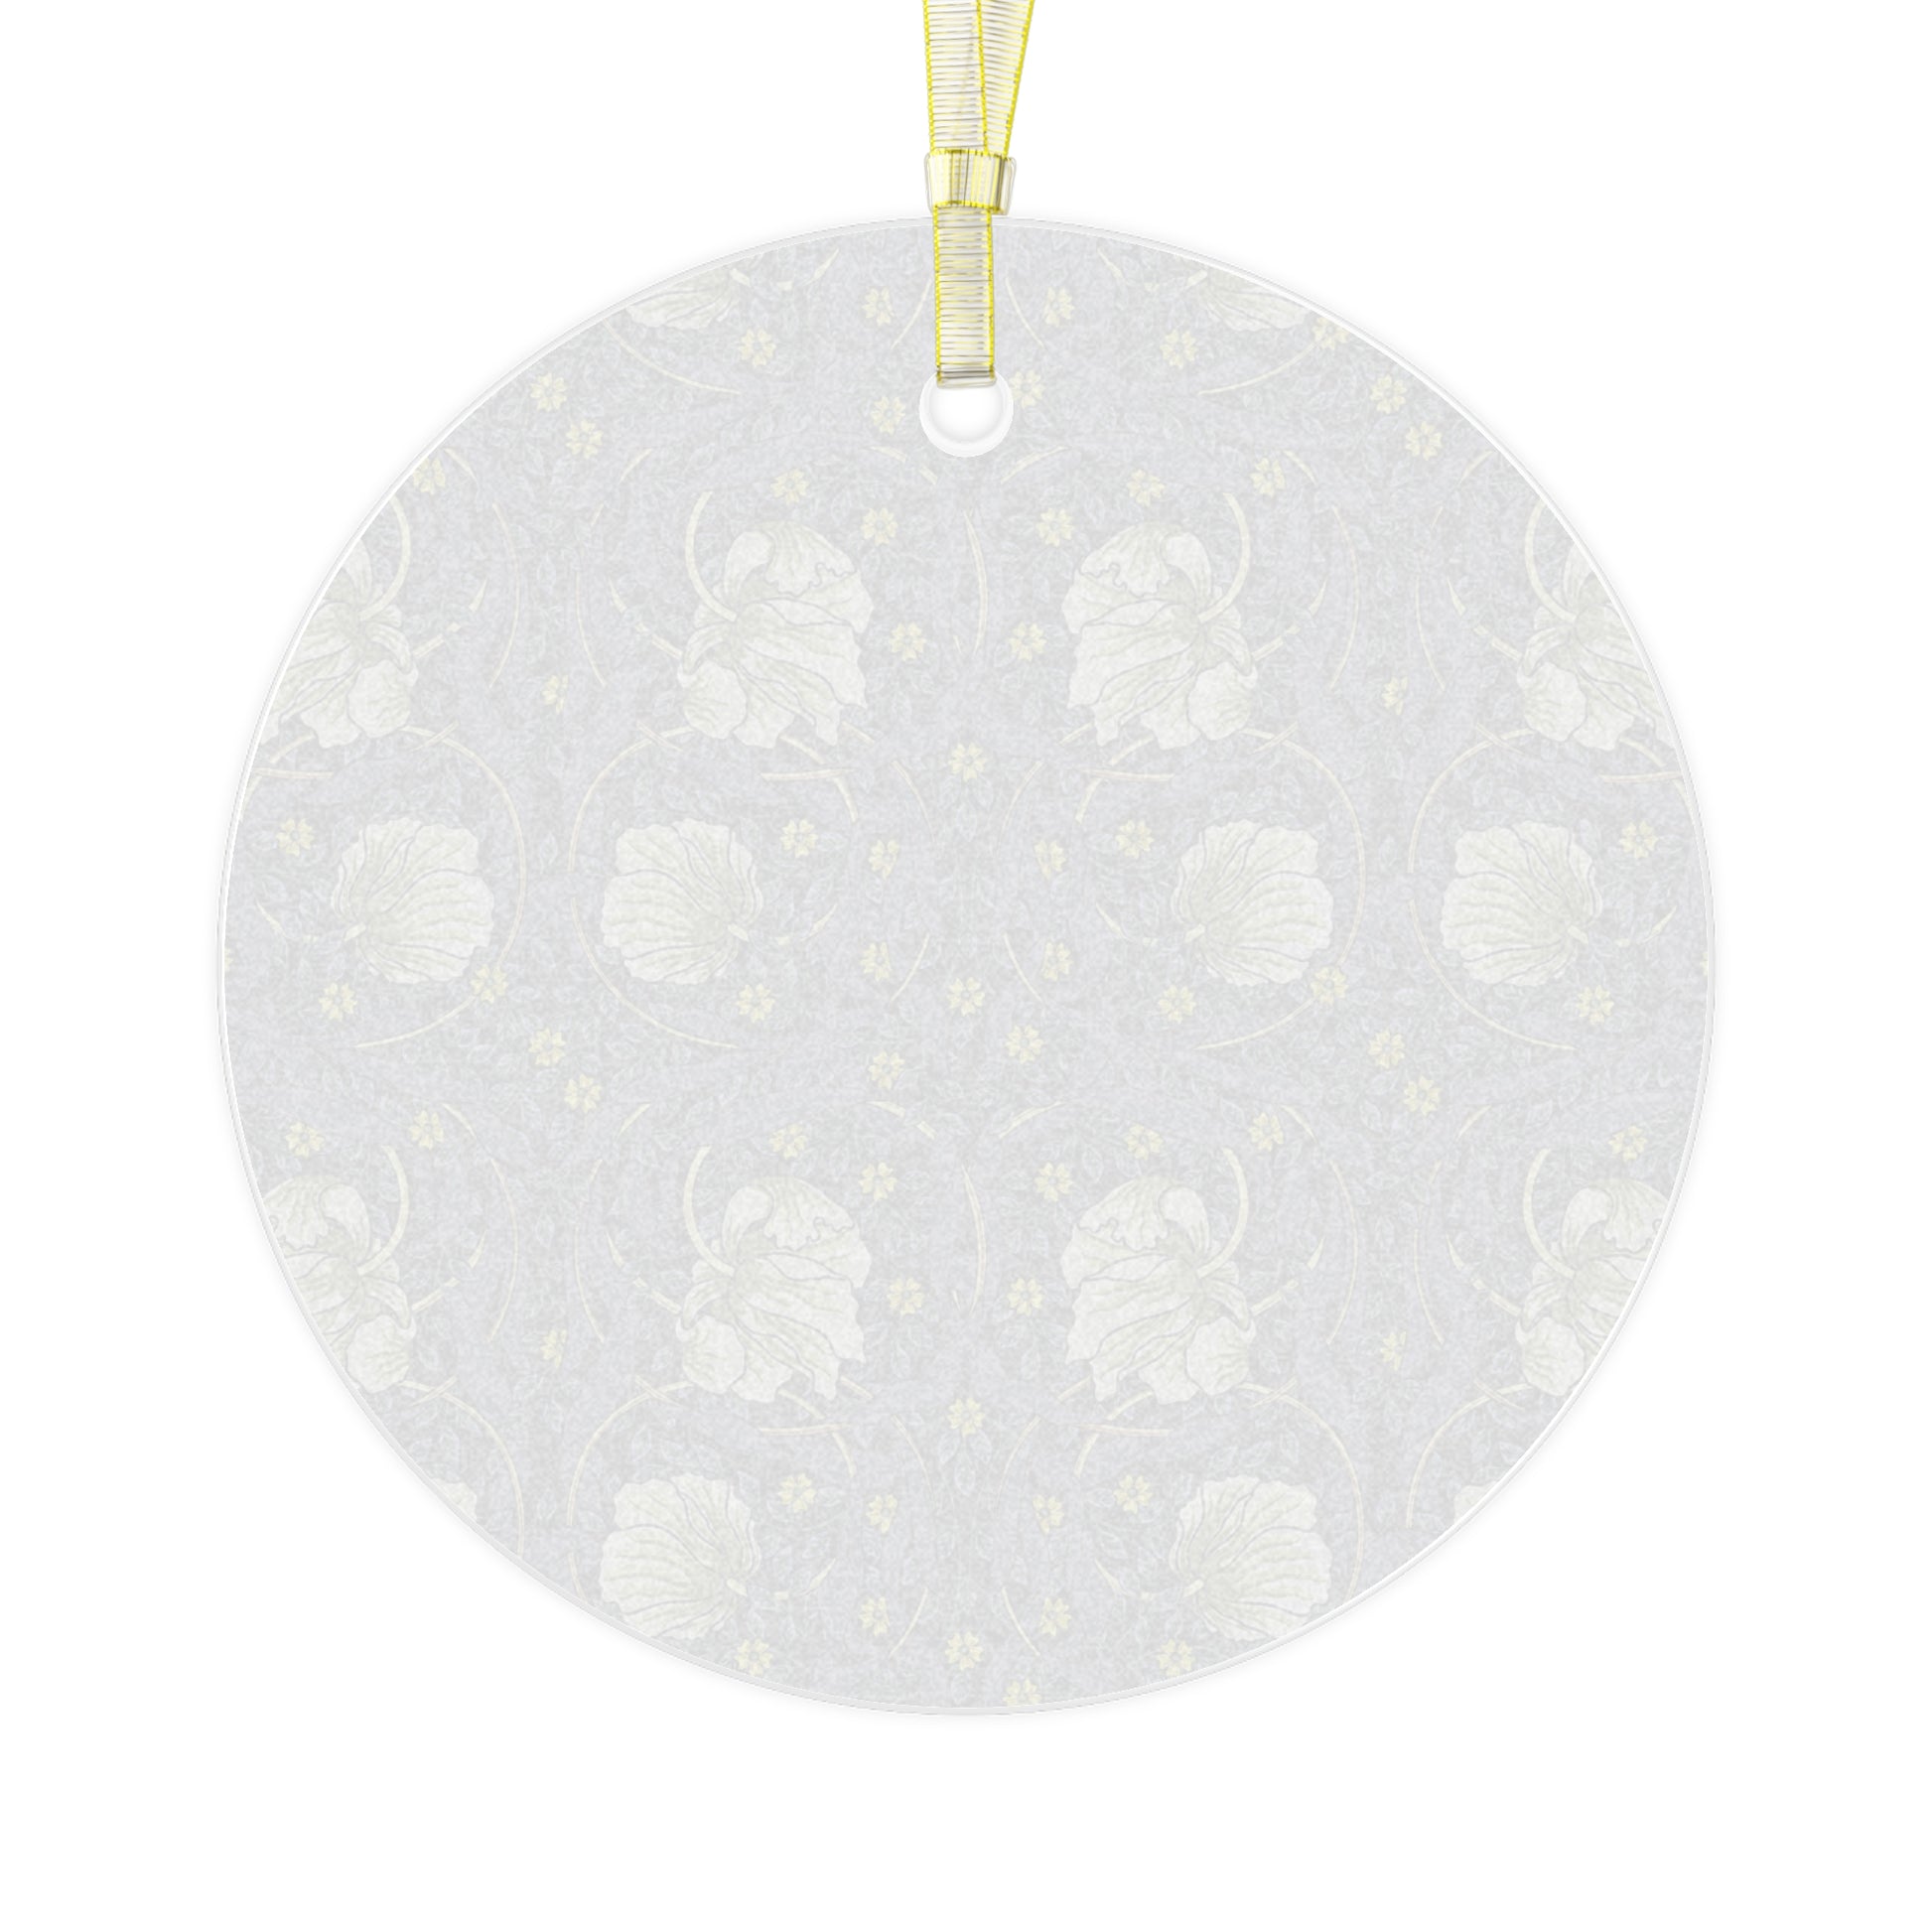 william-morris-co-christmas-heirloom-glass-ornament-pimpernel-collection-lavender-3